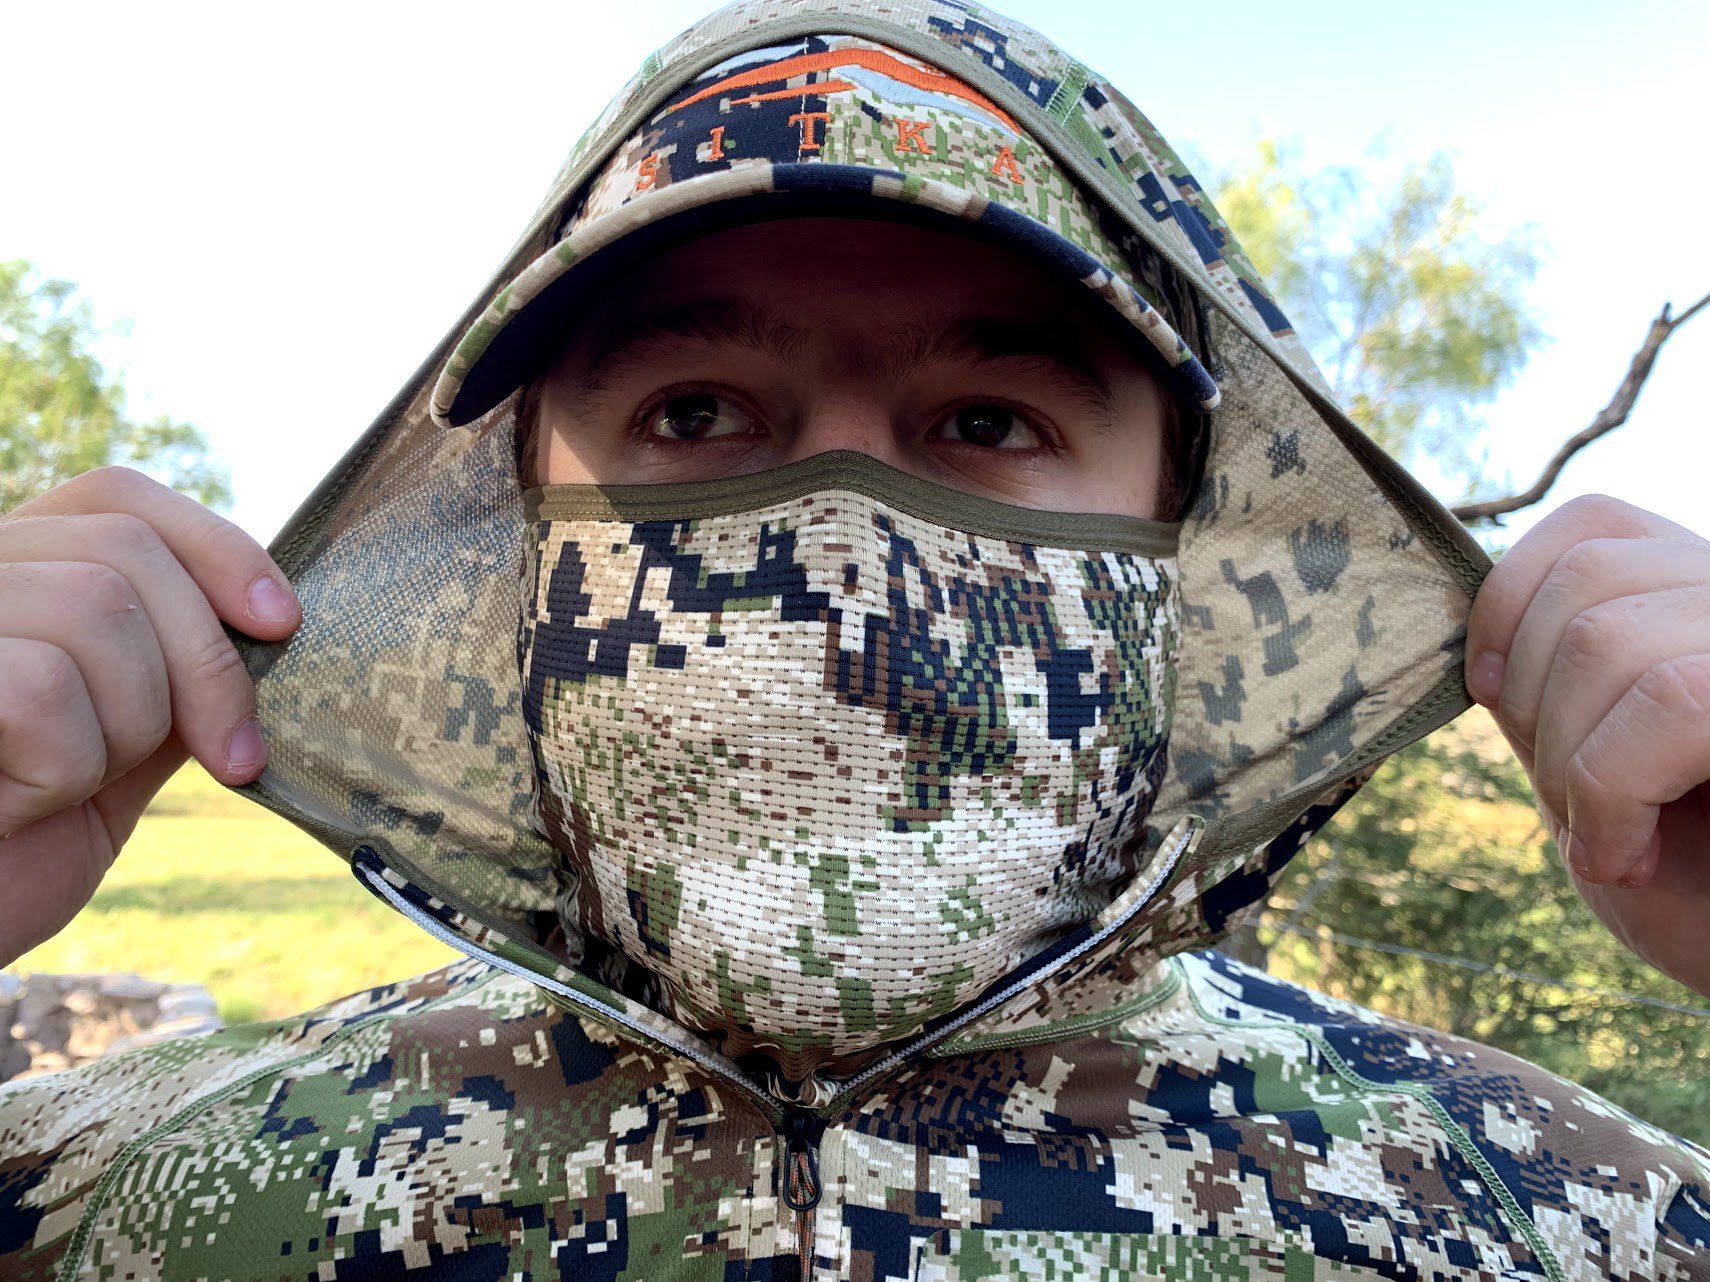 Sitka Gear is the Key to Beating the Early Season Whitetail Heat ...